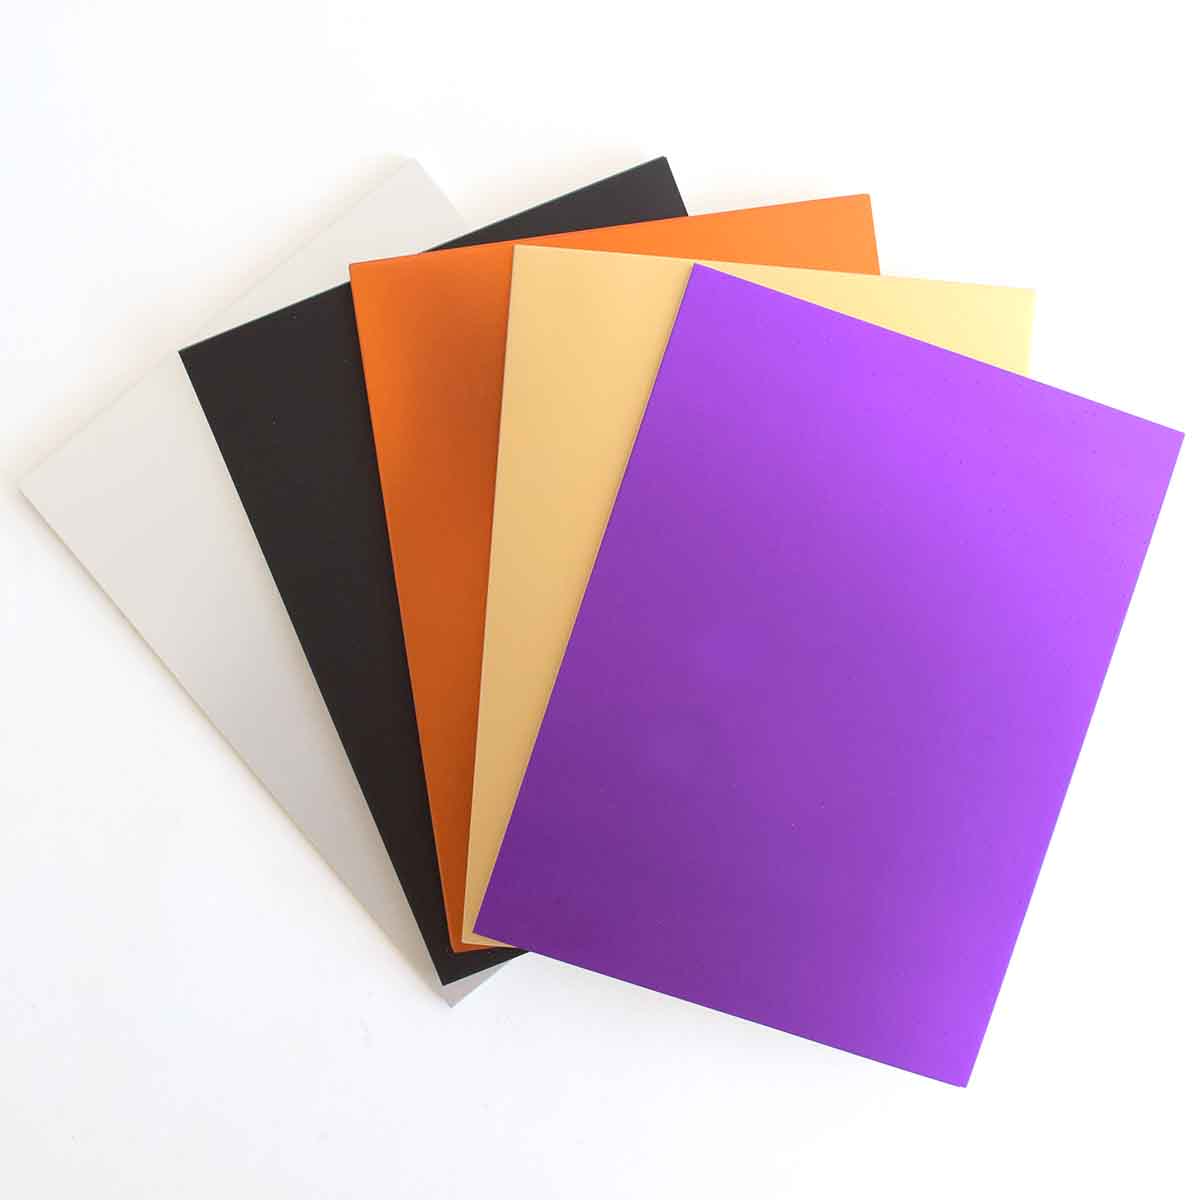 four different colors of paper on a white surface.